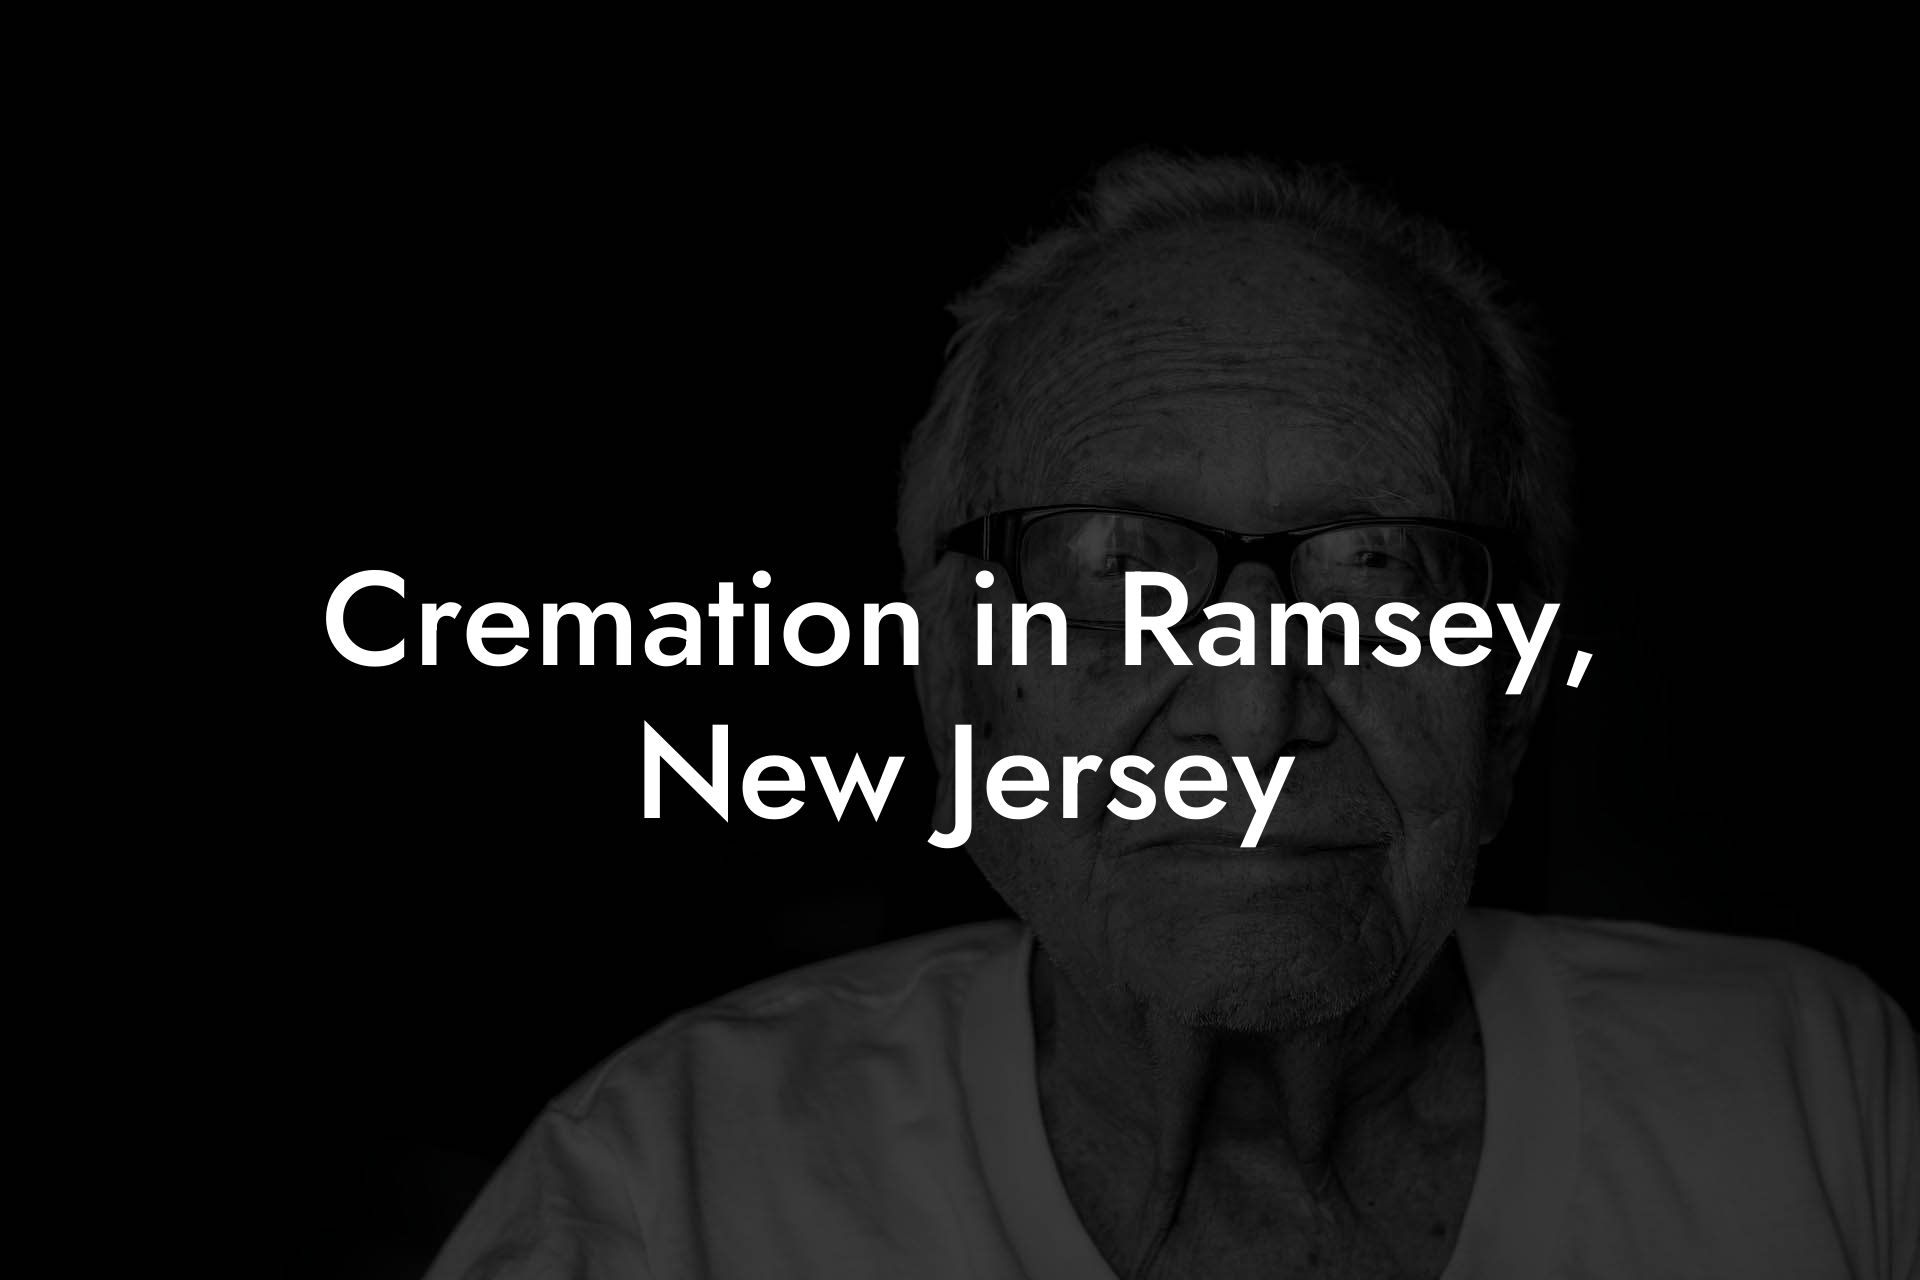 Cremation in Ramsey, New Jersey